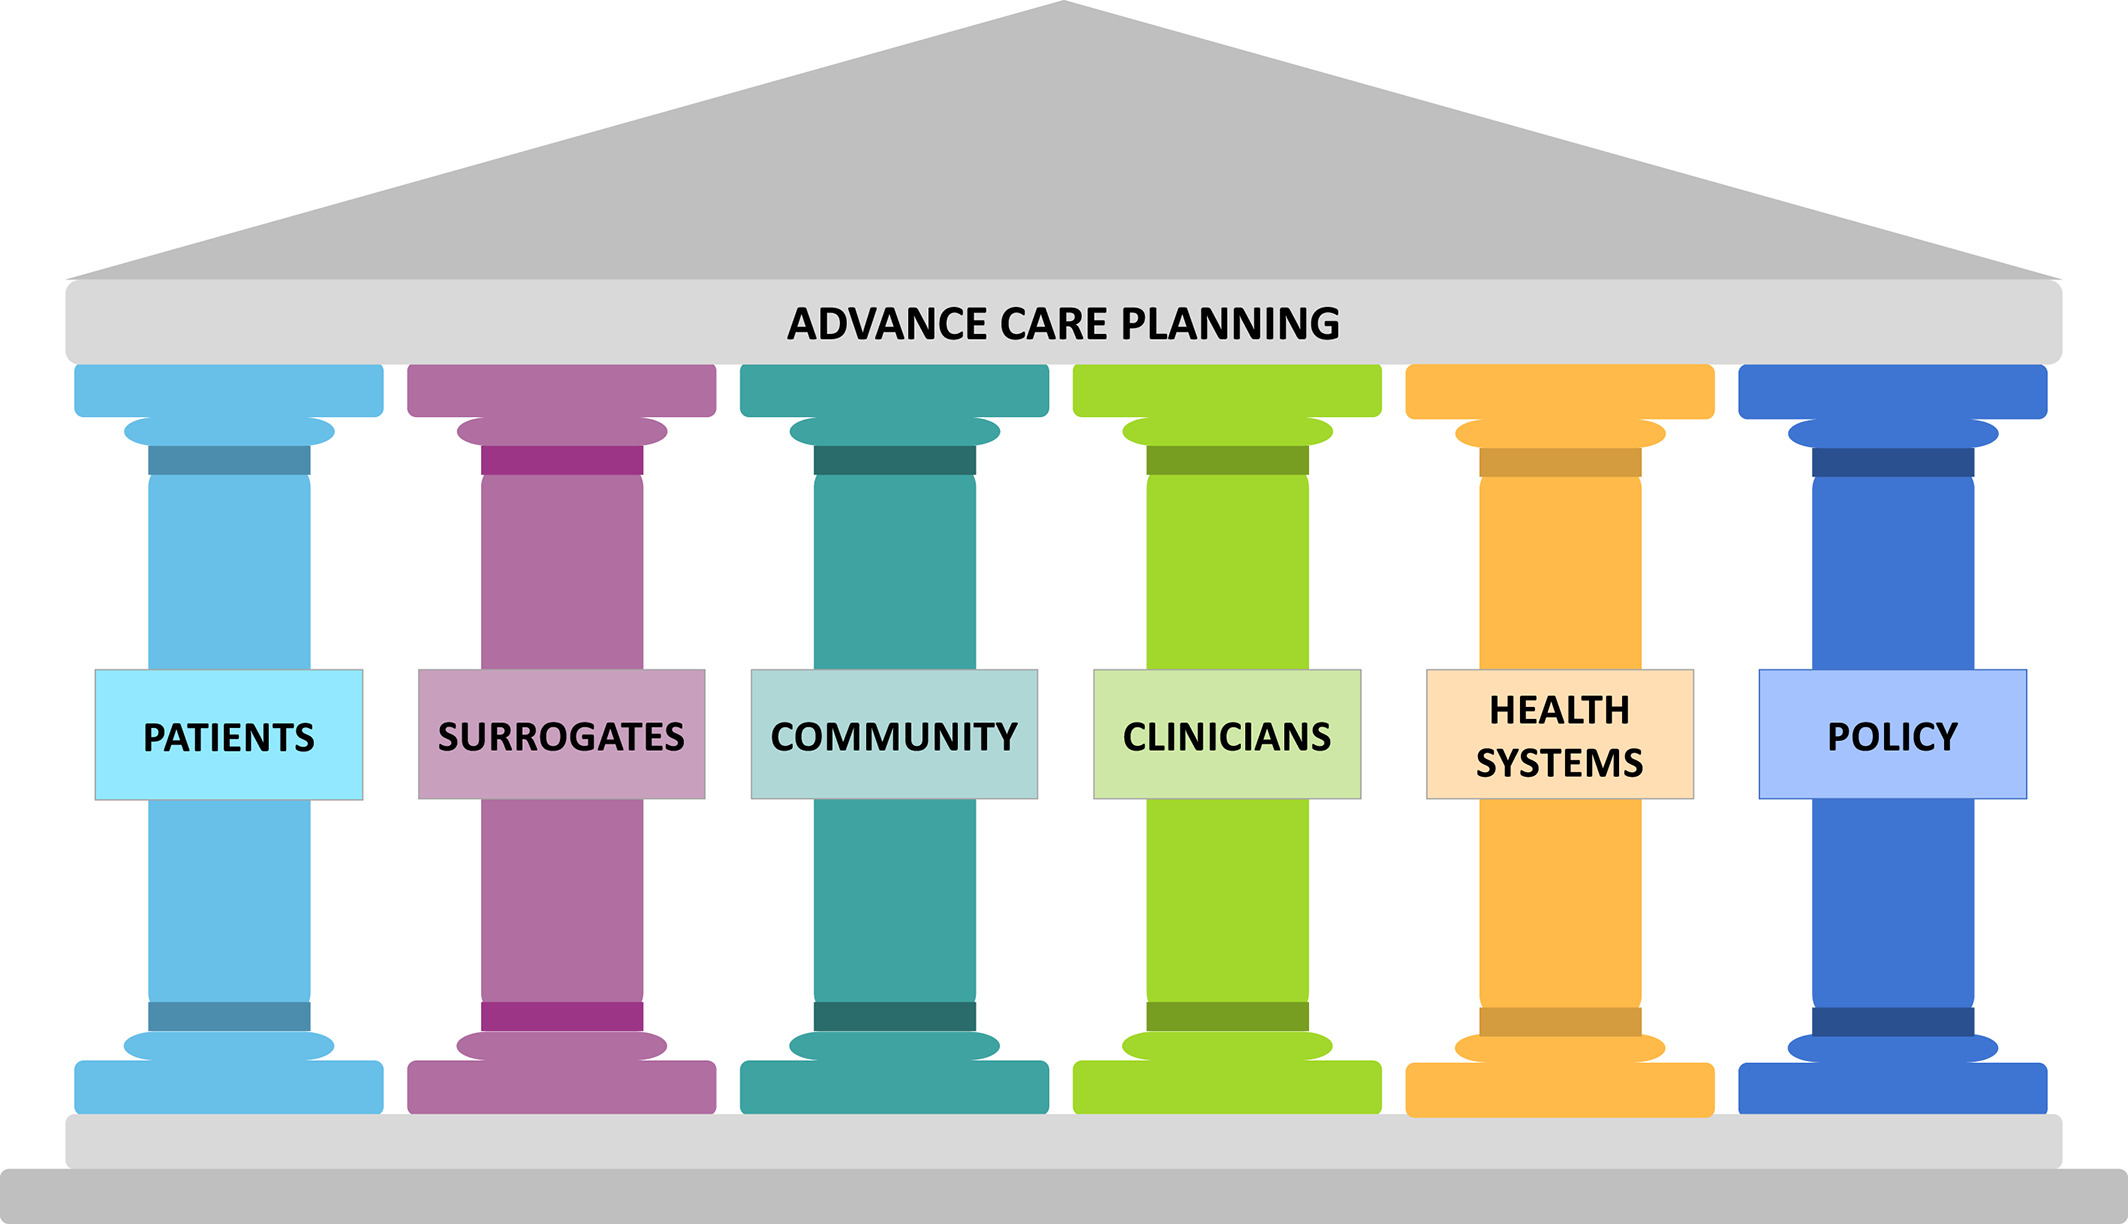 Six pillars of advance care planning. Pillars refer to key stakeholders or potential intervention targets.